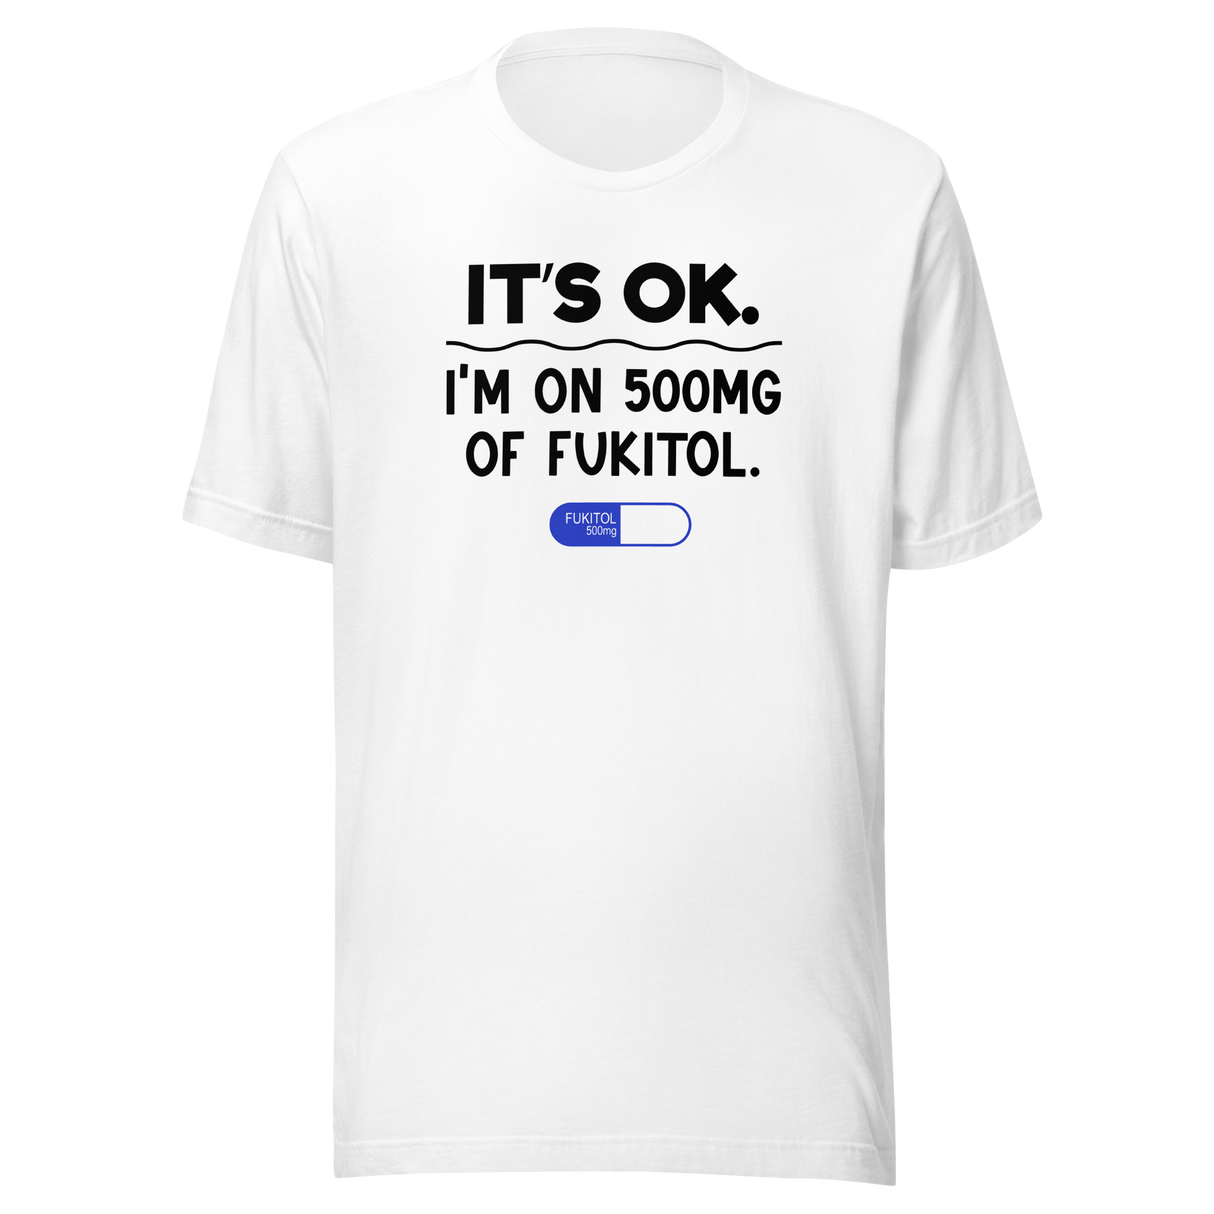 its-ok-im-on-500mg-of-fukitol-life-tee-funny-t-shirt-cool-tee-funny-t-shirt-sarcastic-tee#color_white